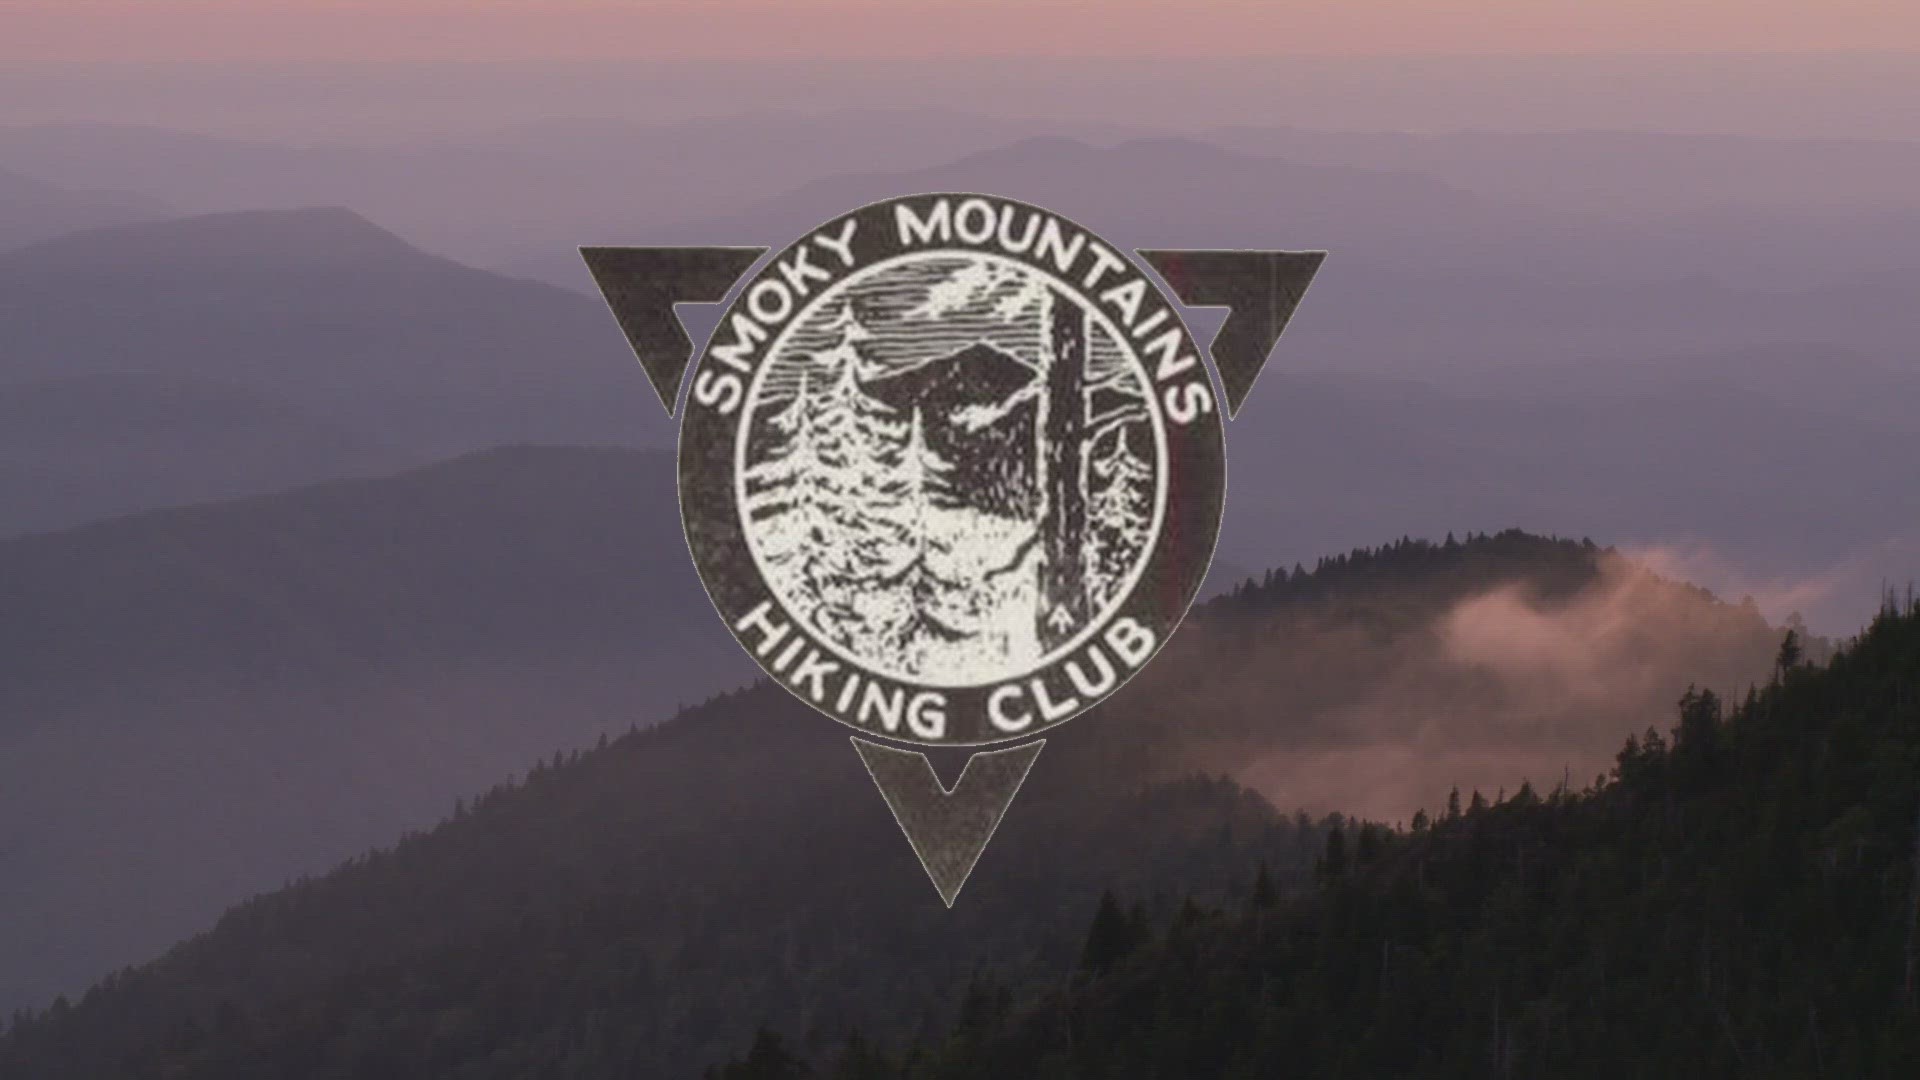 What started as a hike to Mount LeConte in 1924 turned into a century of hiking, education, volunteering and conservation in the Great Smoky Mountains.